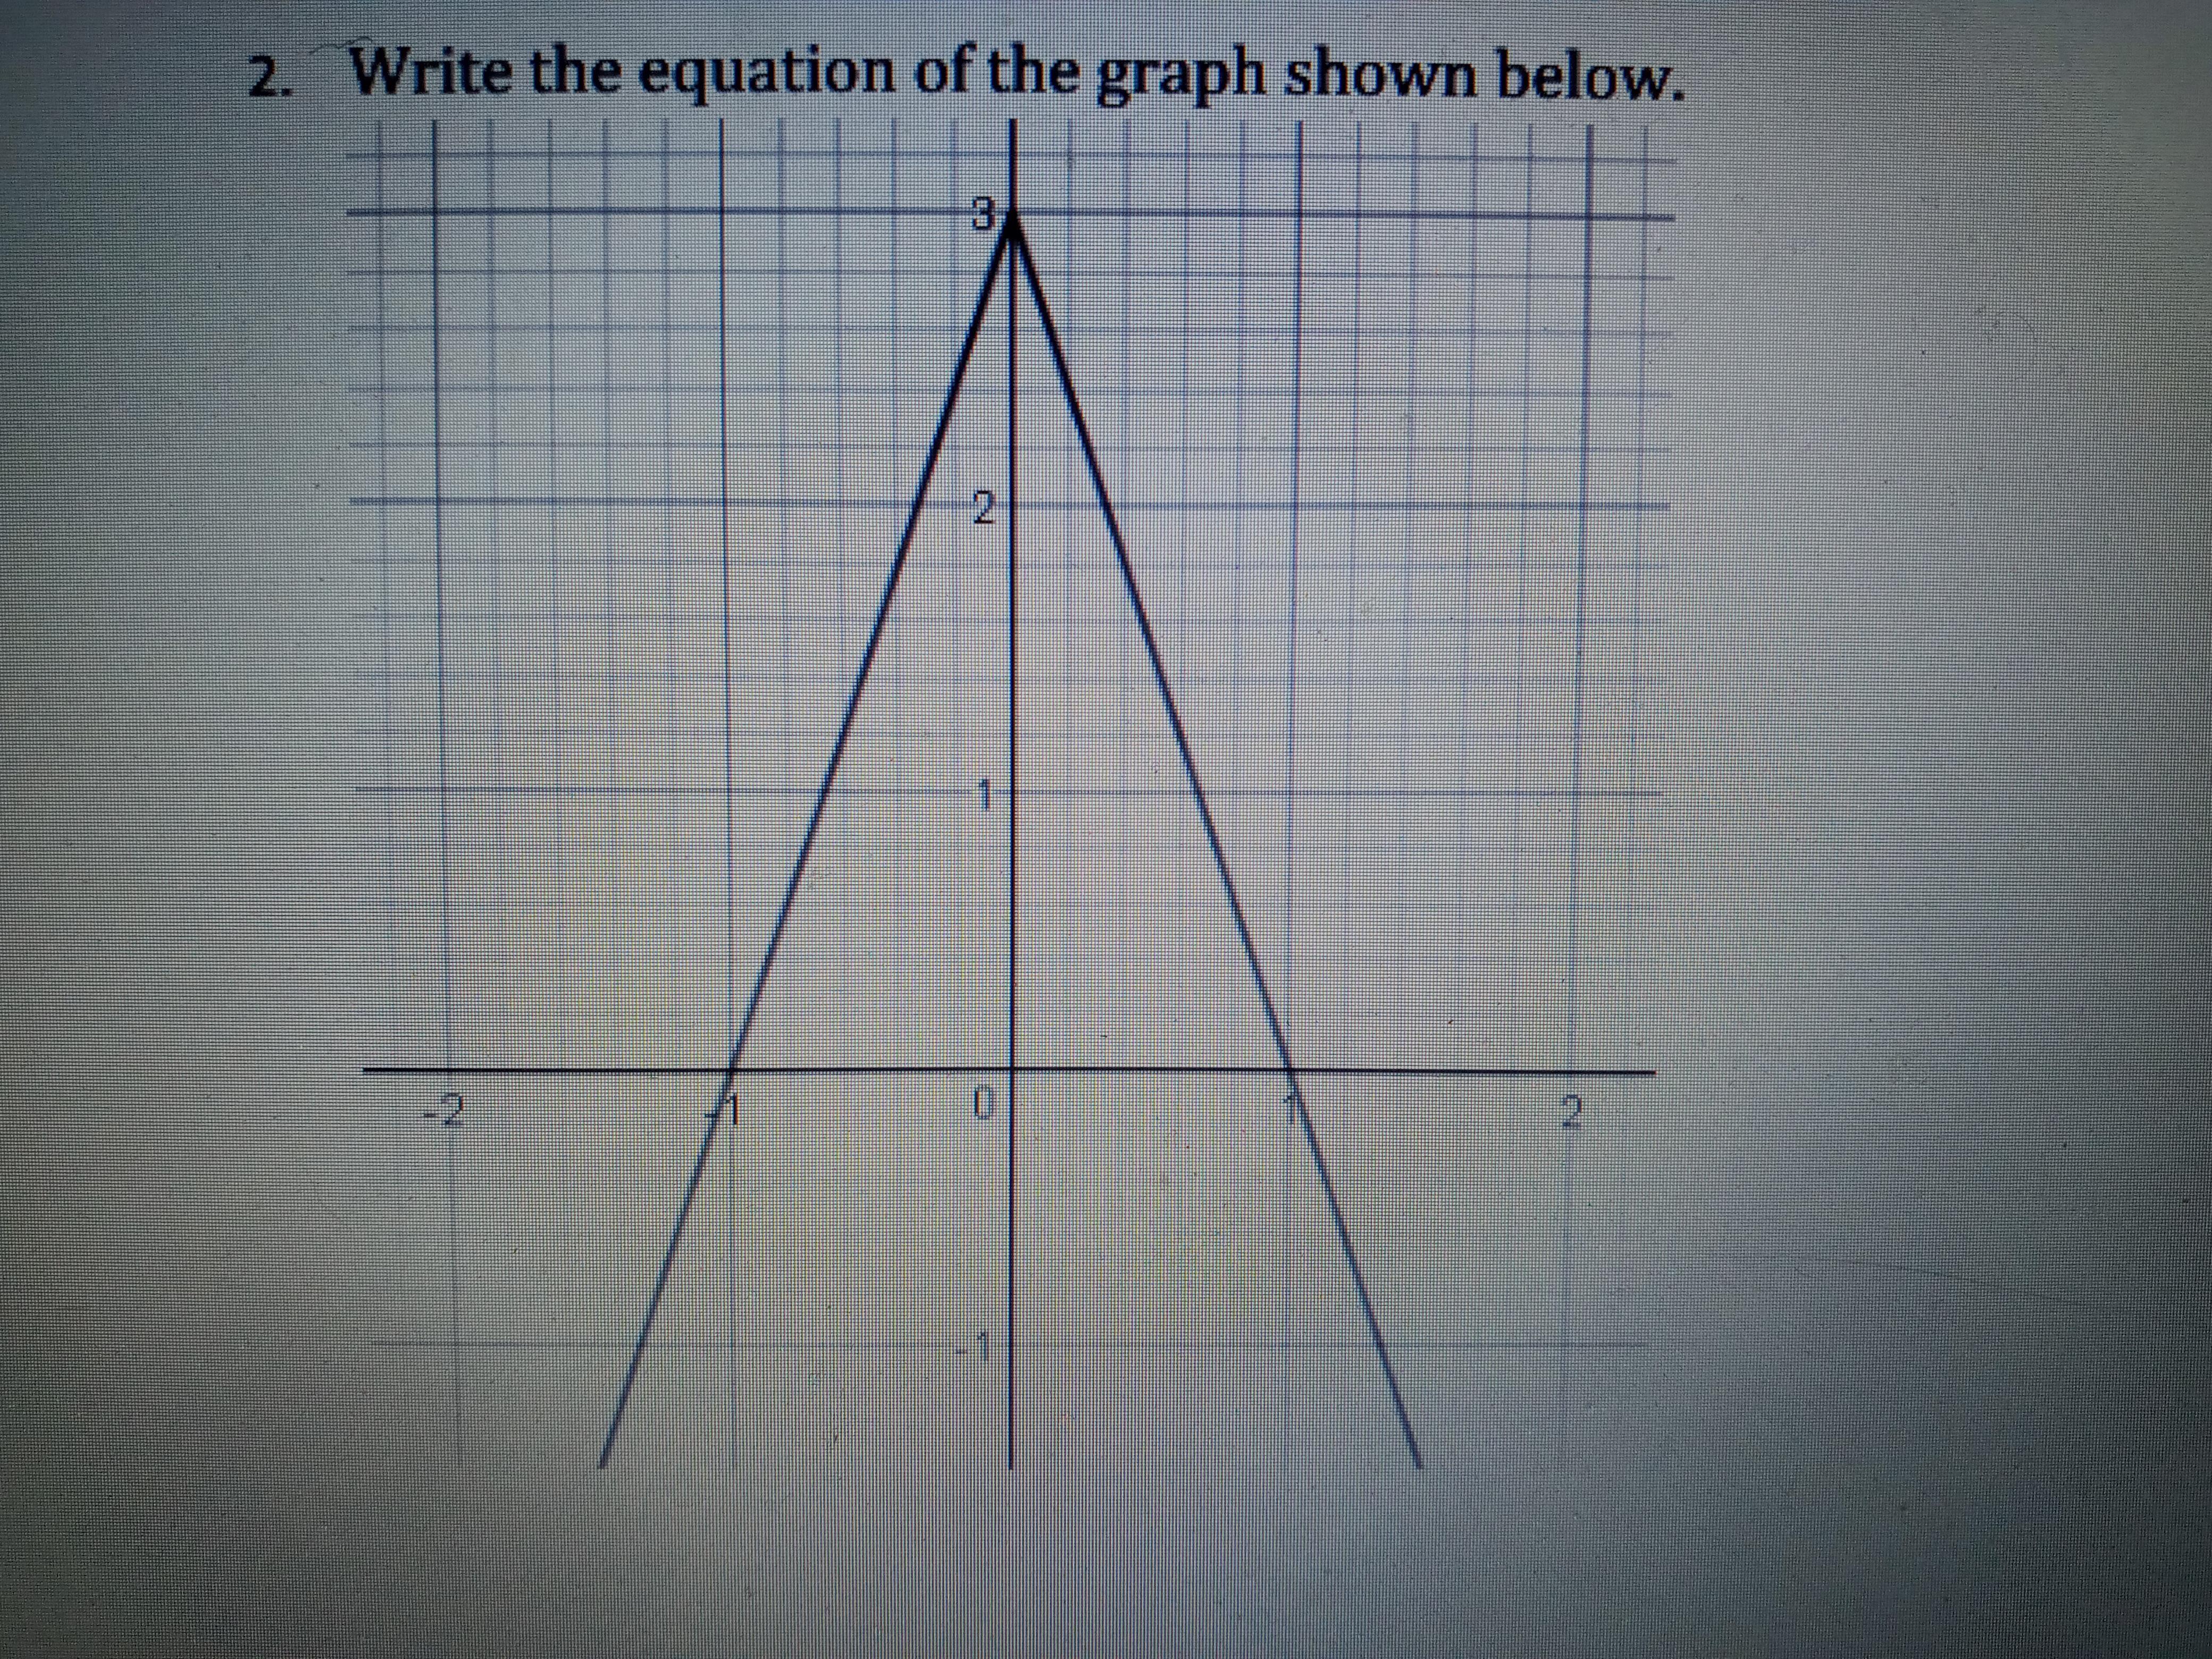 2. Write The Equation Of The Graph Shown Below. 3 1 -2 0 2 1-